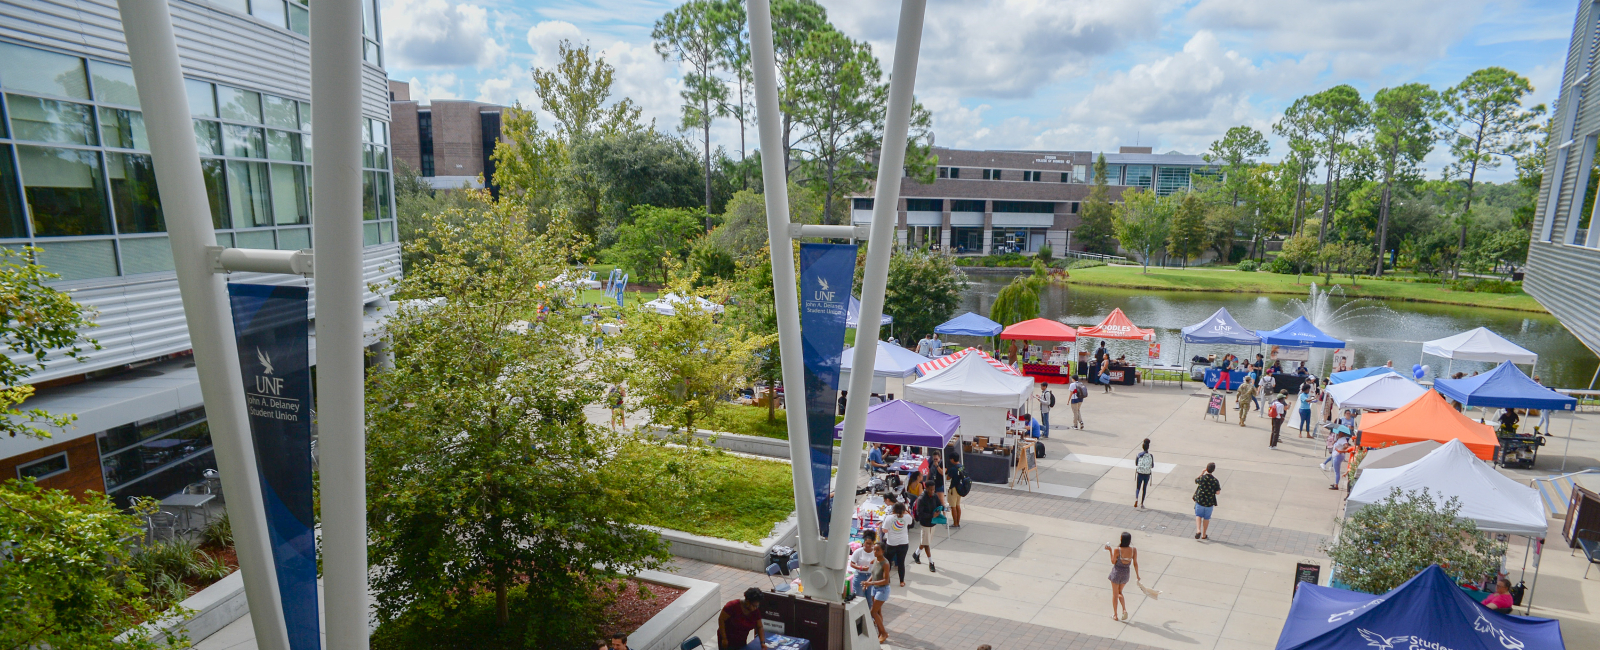 Aerial shot of the UNF student union courtyard filled with tents and students on a sunny day